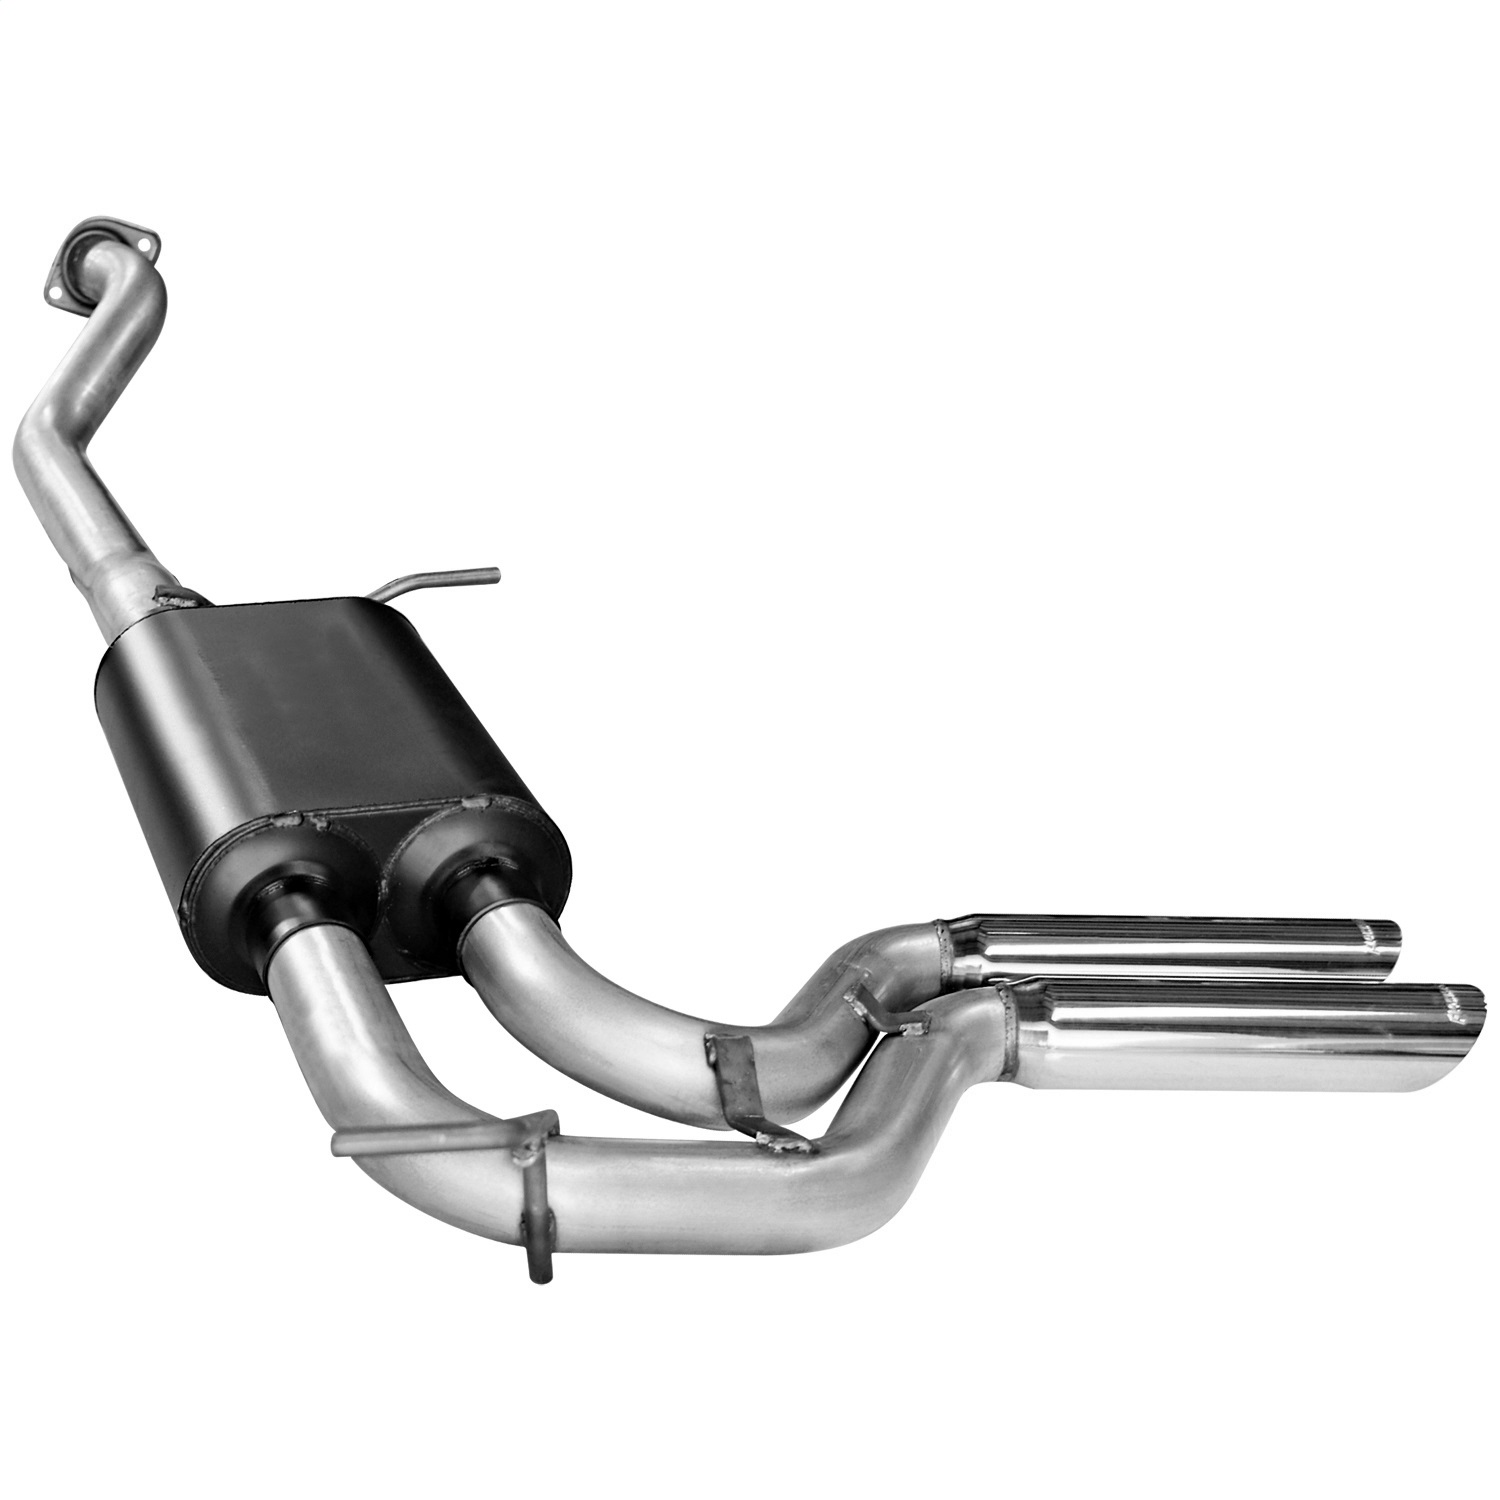 Flowmaster Flowmaster 817395 American Thunder Muscle Truck Exhaust System